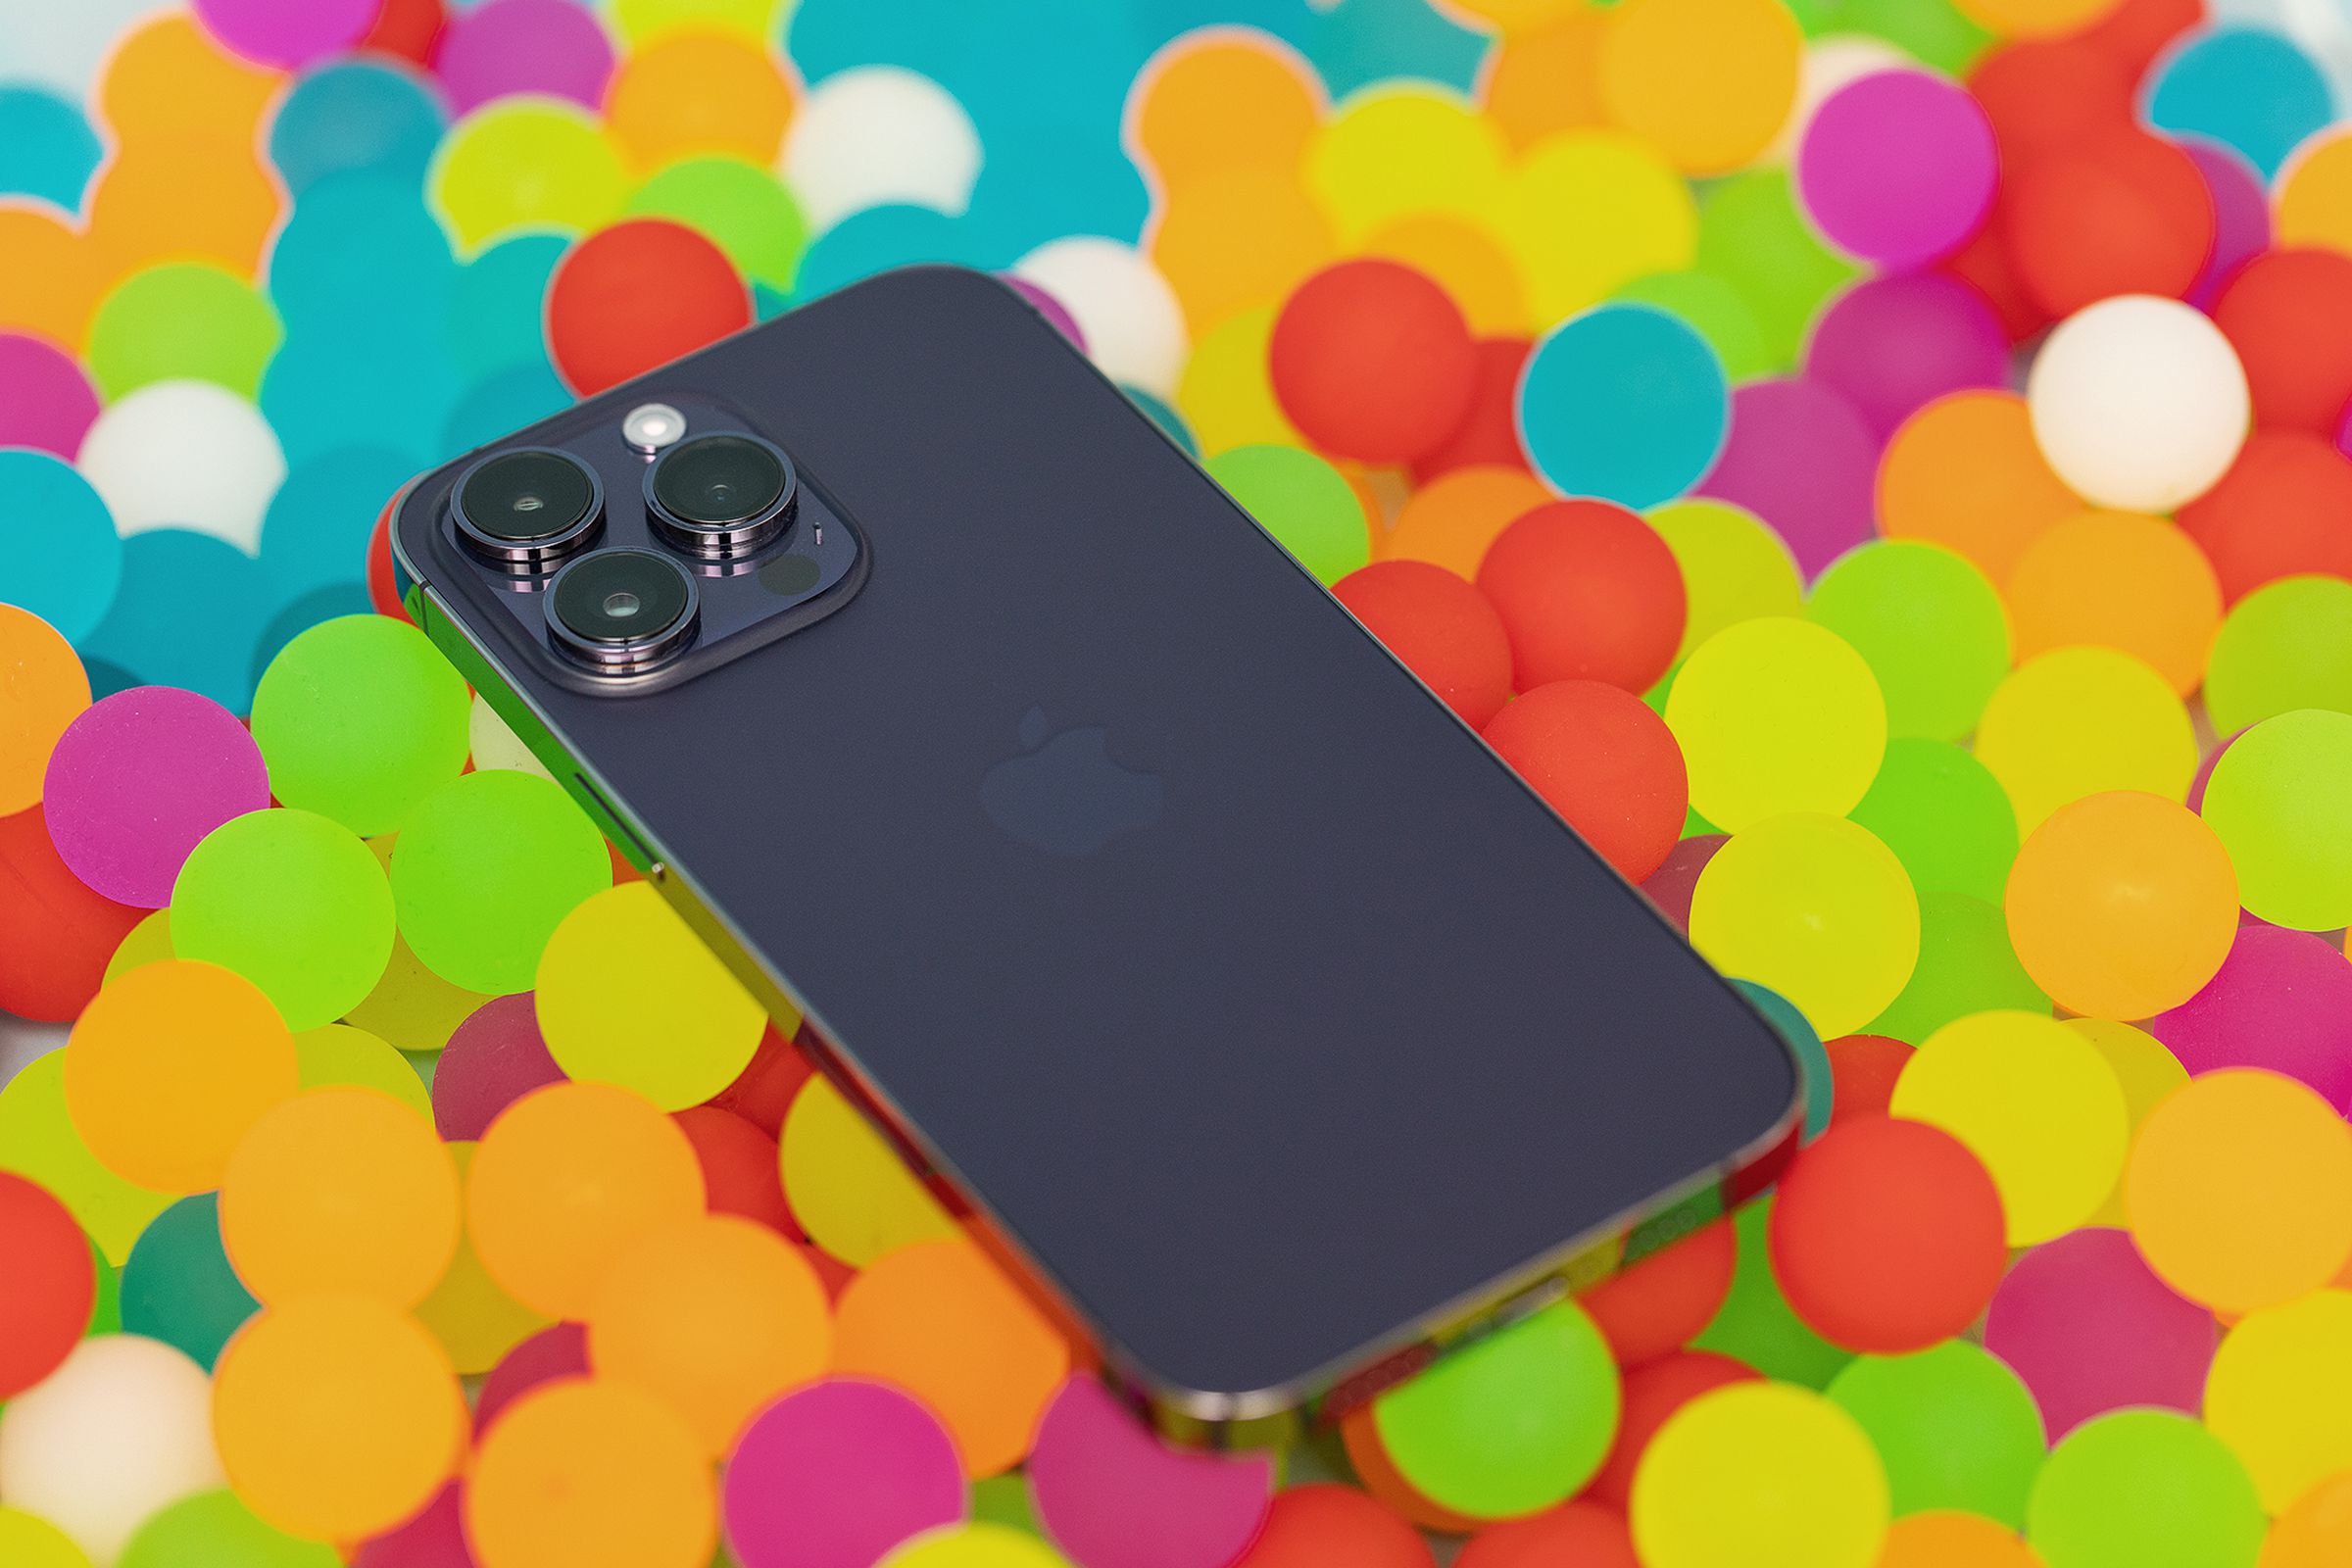 The iPhone 14 Pro has one of the best smartphone camera systems money can buy, but it still has its limitations.